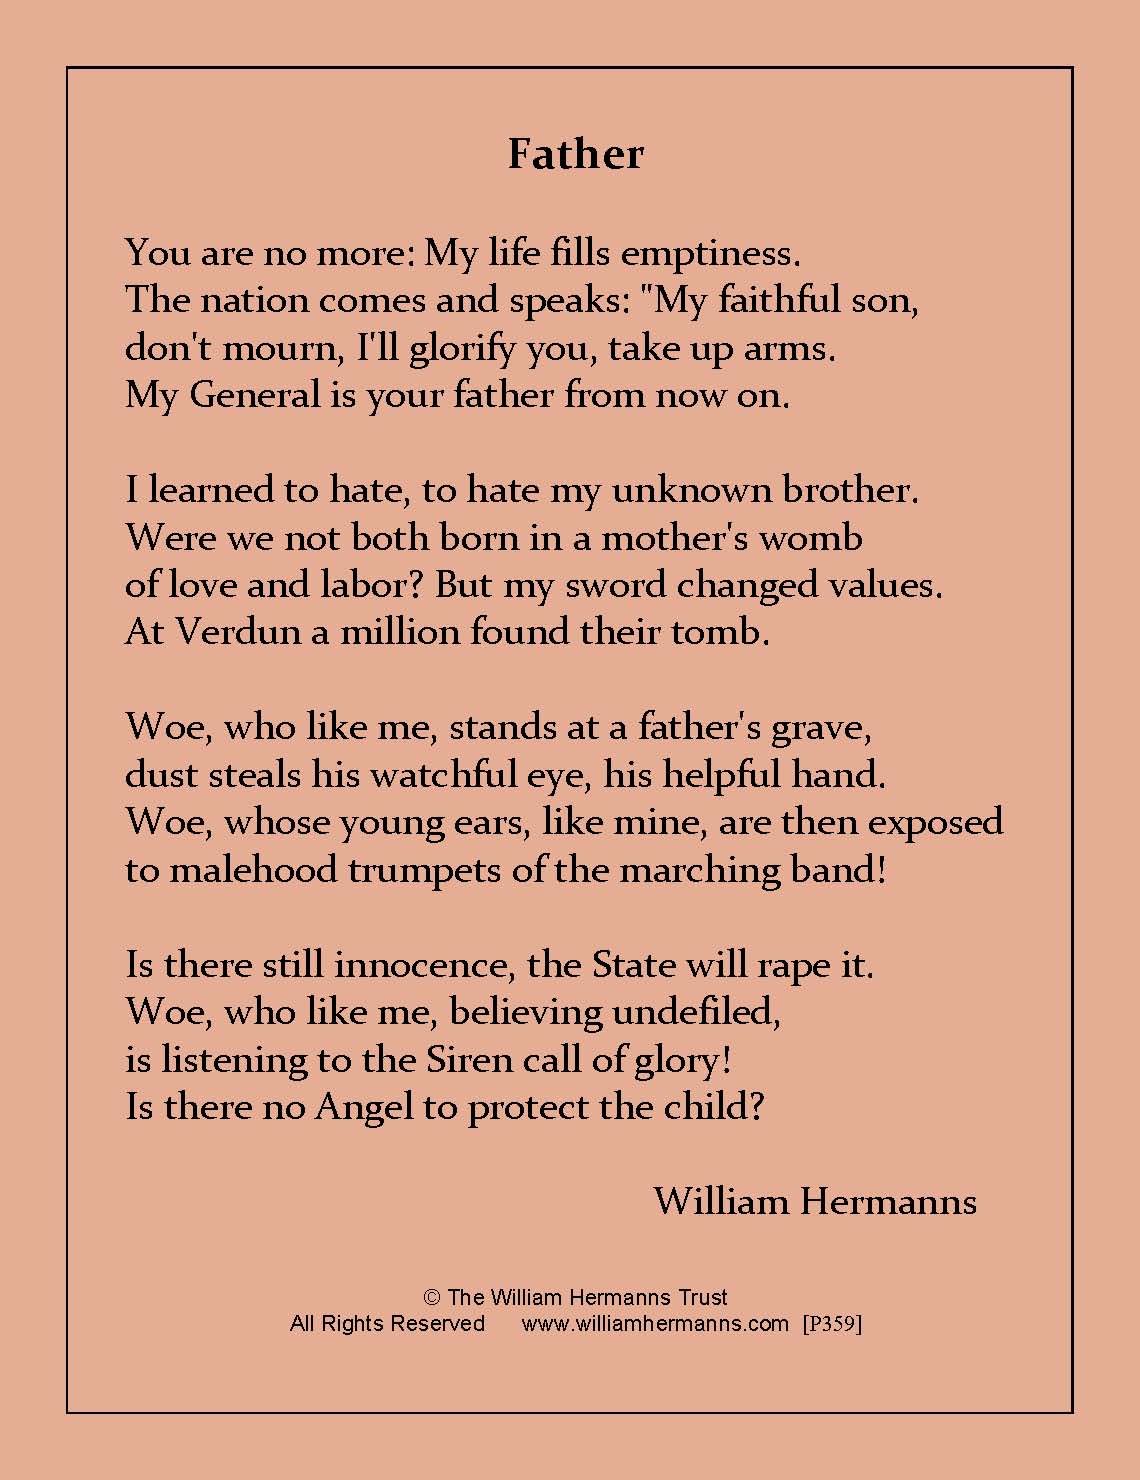 Father by William Hermanns (translation of his Gedicht Vater)